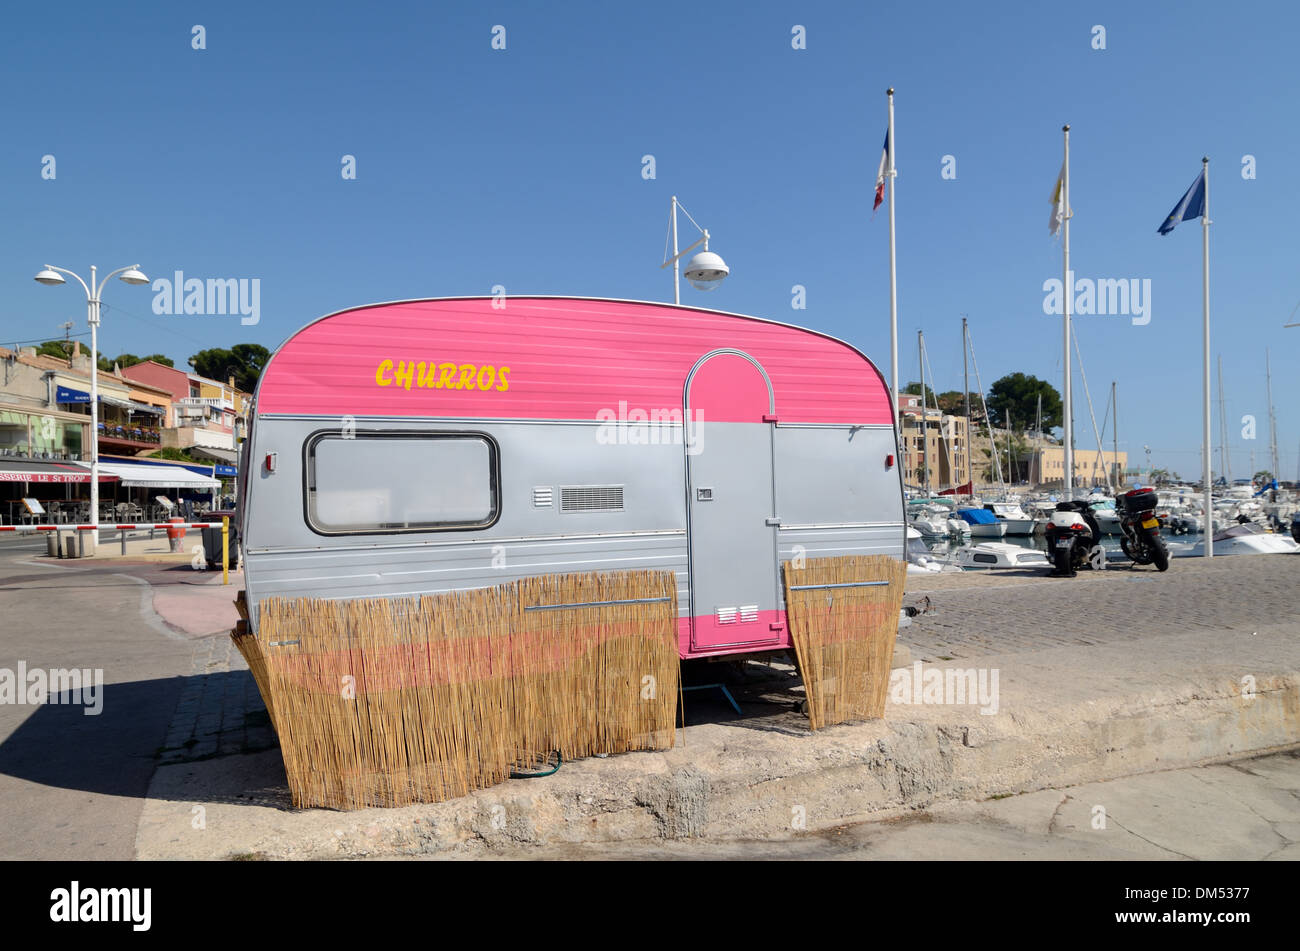 Pink Caravan used as Fast Food Stall or Food Truck Selling Churros on the Port Carry-le-Rouet Provence France Stock Photo